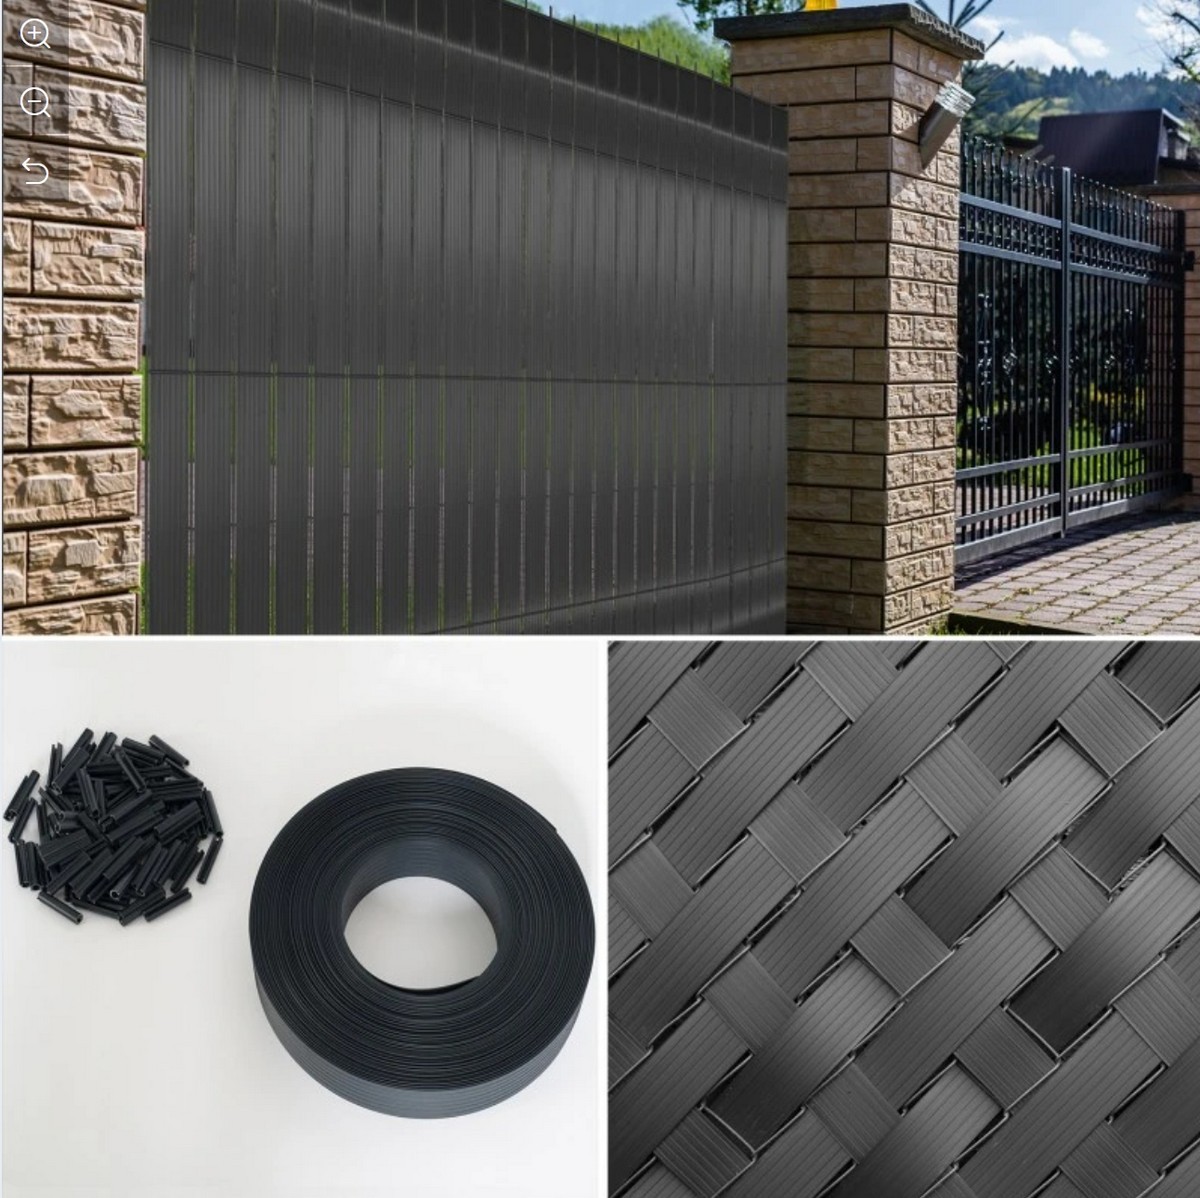 Non-transparent, elegant PVC shading directly into your fence